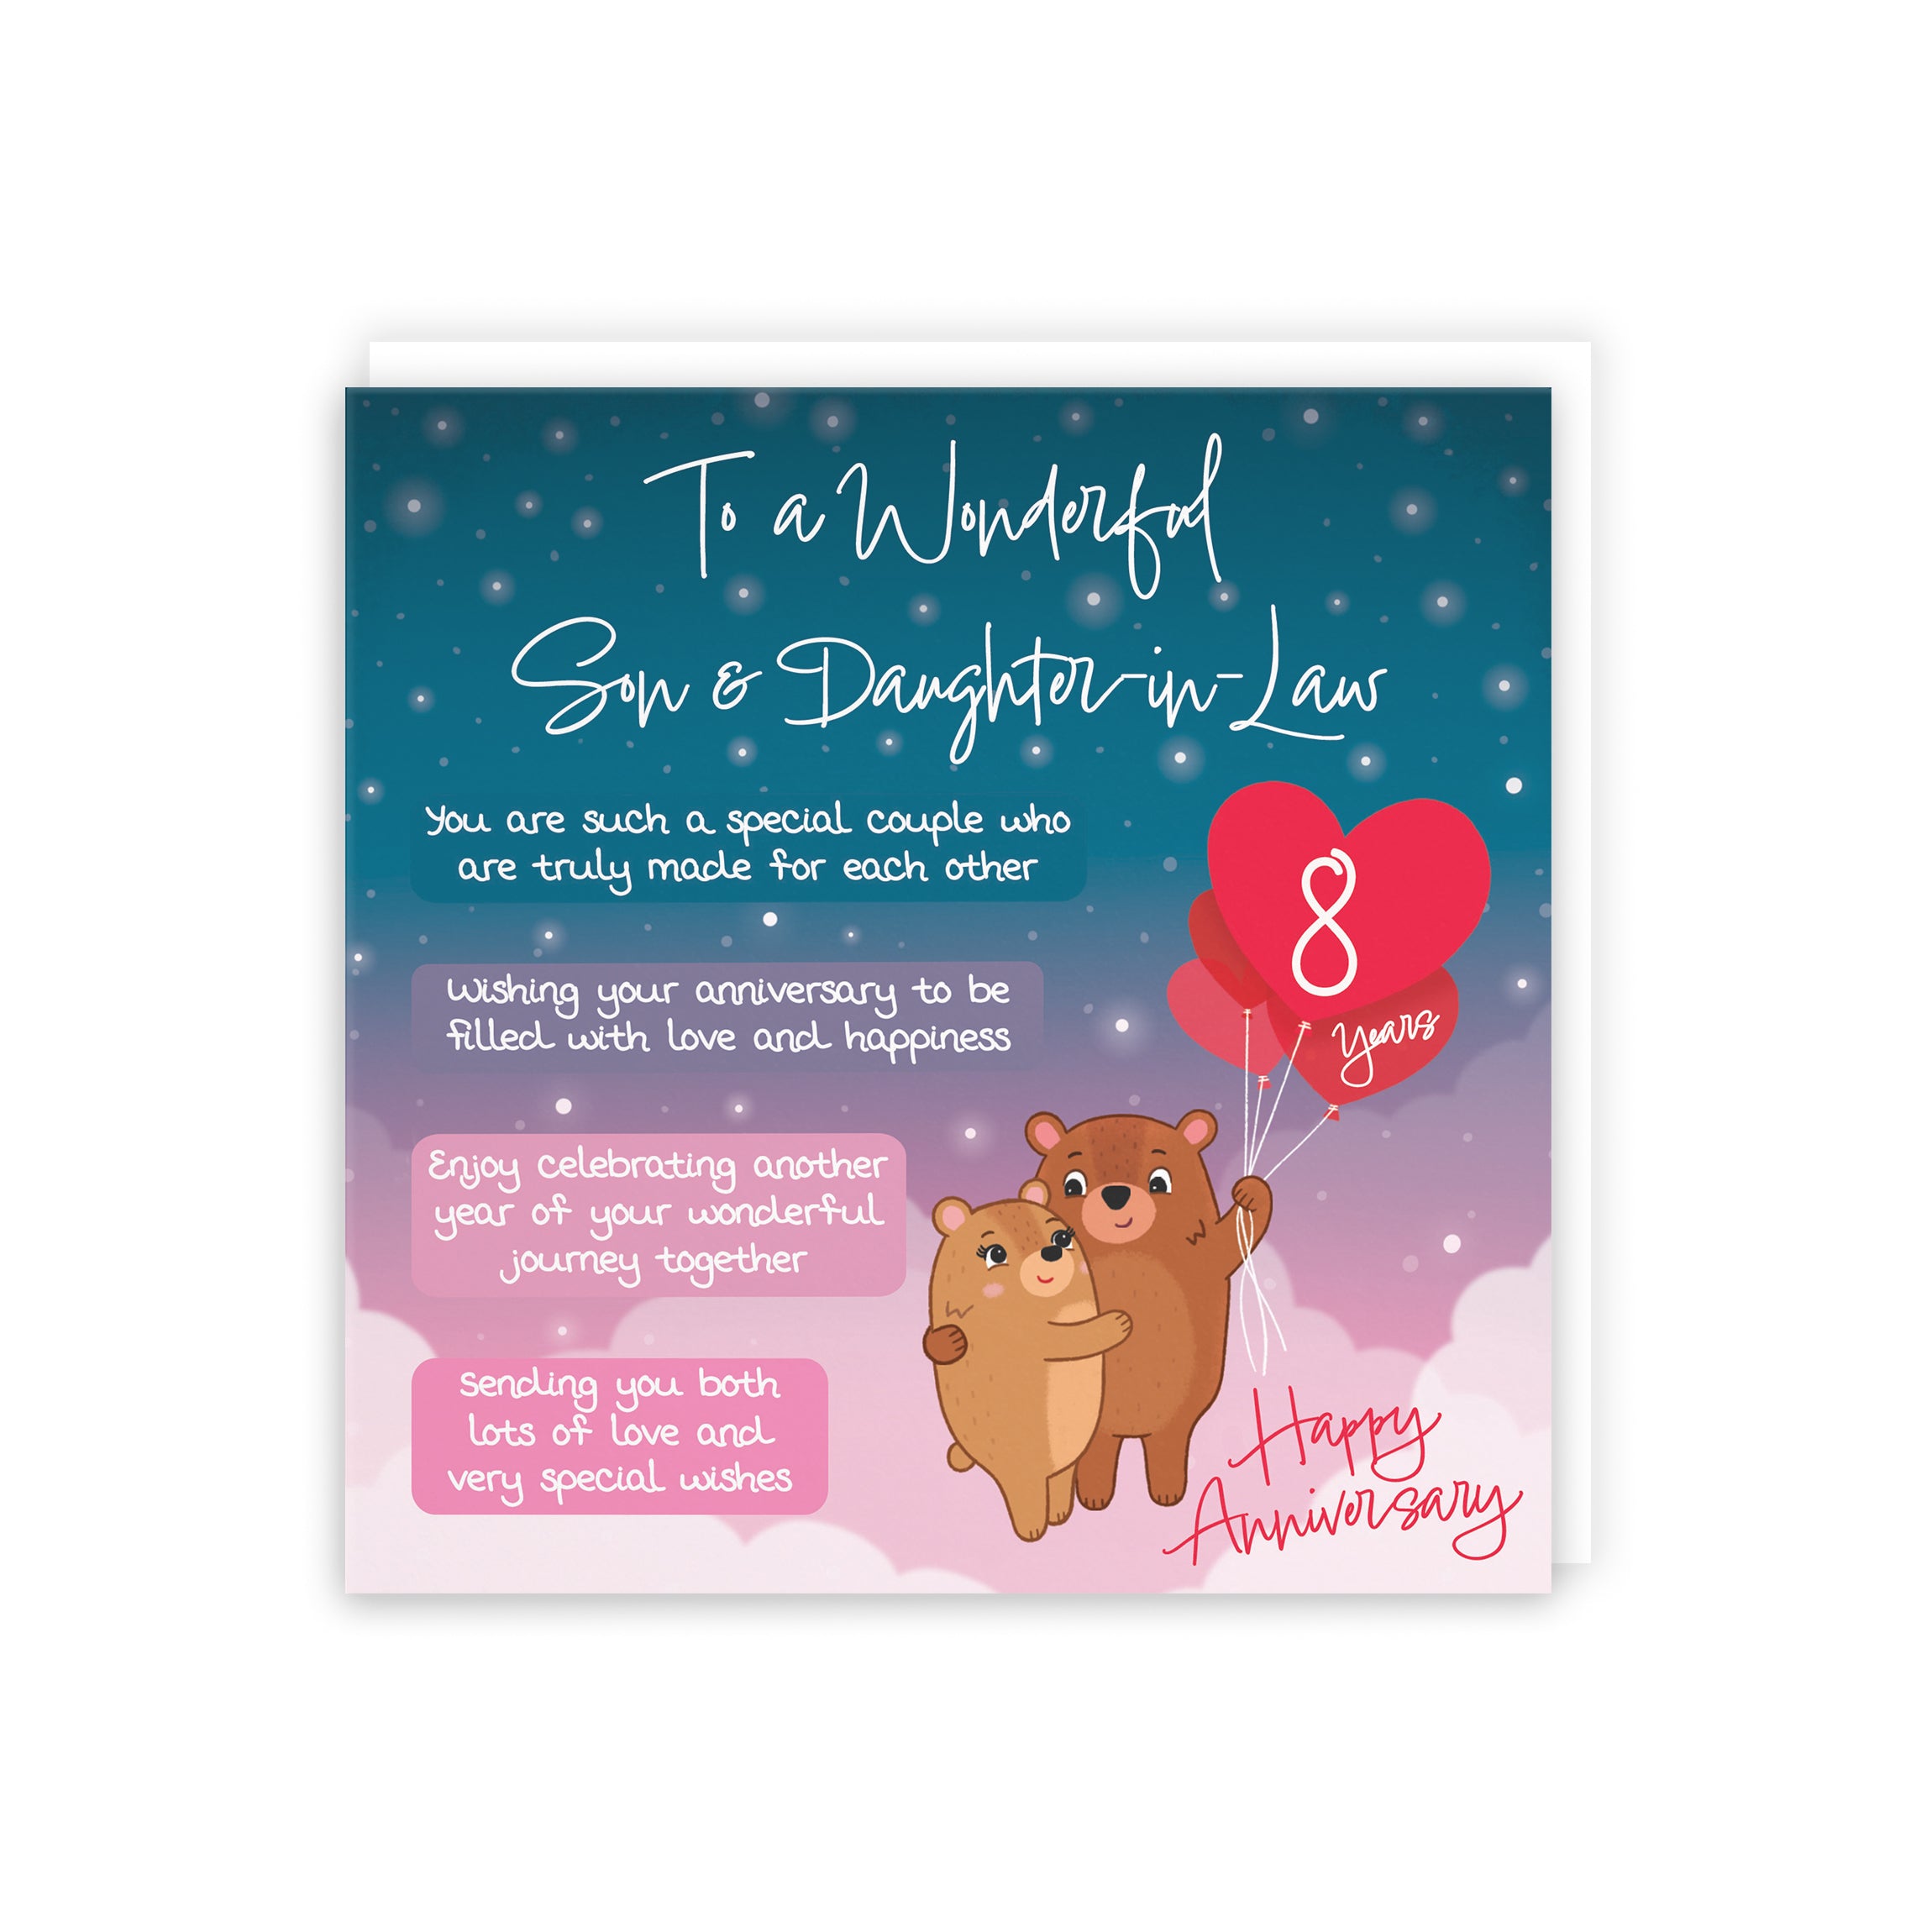 Son And Daughter In Law 8th Anniversary Card Starry Night Cute Bears